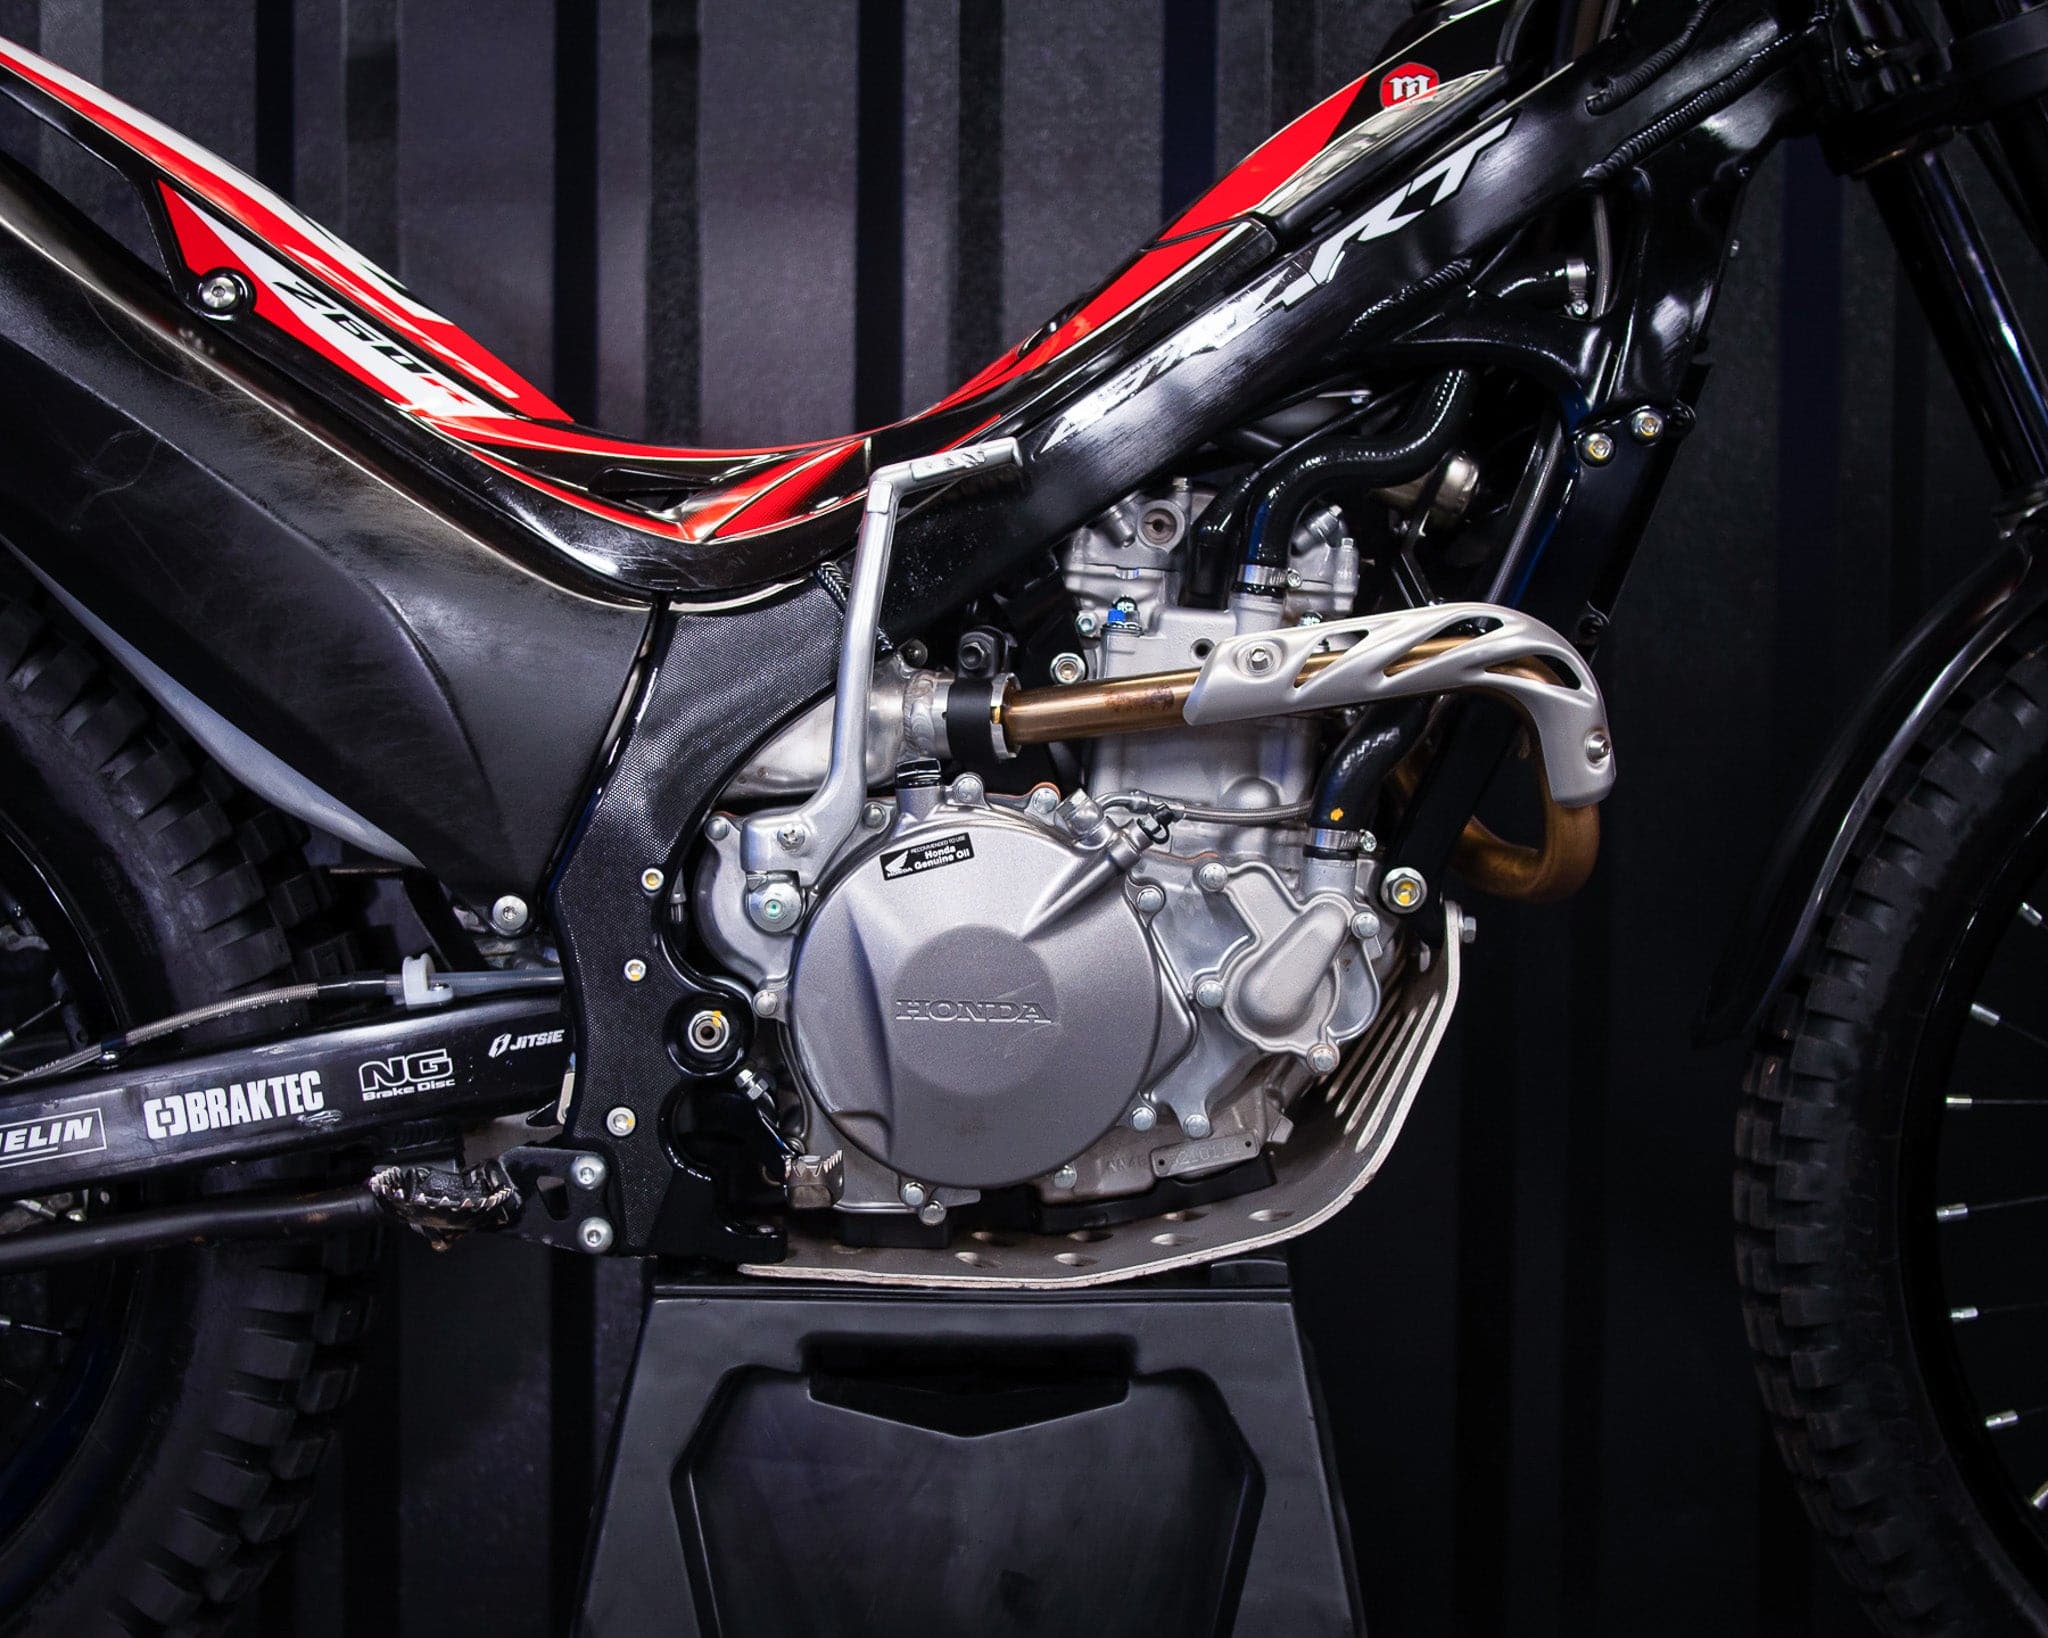 Approved Used 2022 Montesa Cota 4RT 260R Trials Bike - Road and Trials